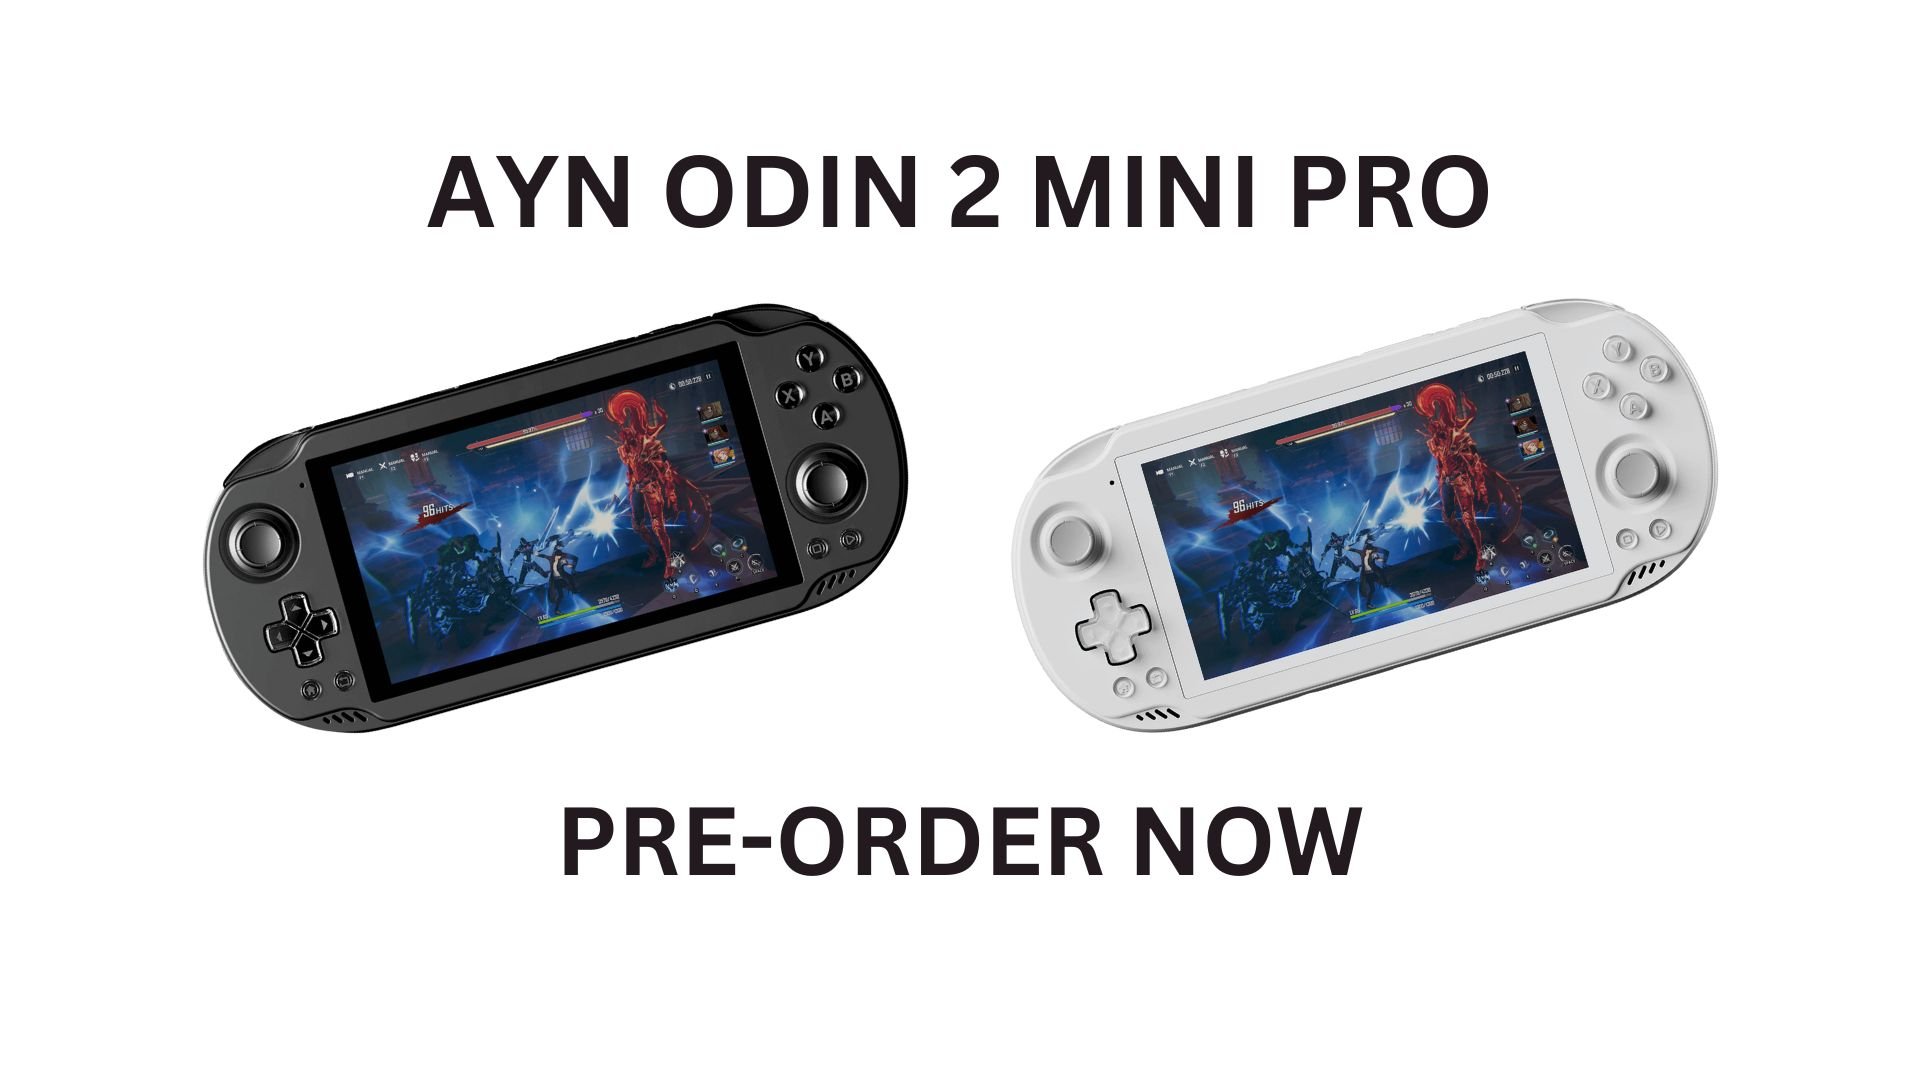 Pre-Order the AYN Odin 2 Mini Pro: The Next Level of Android Gaming Handhelds